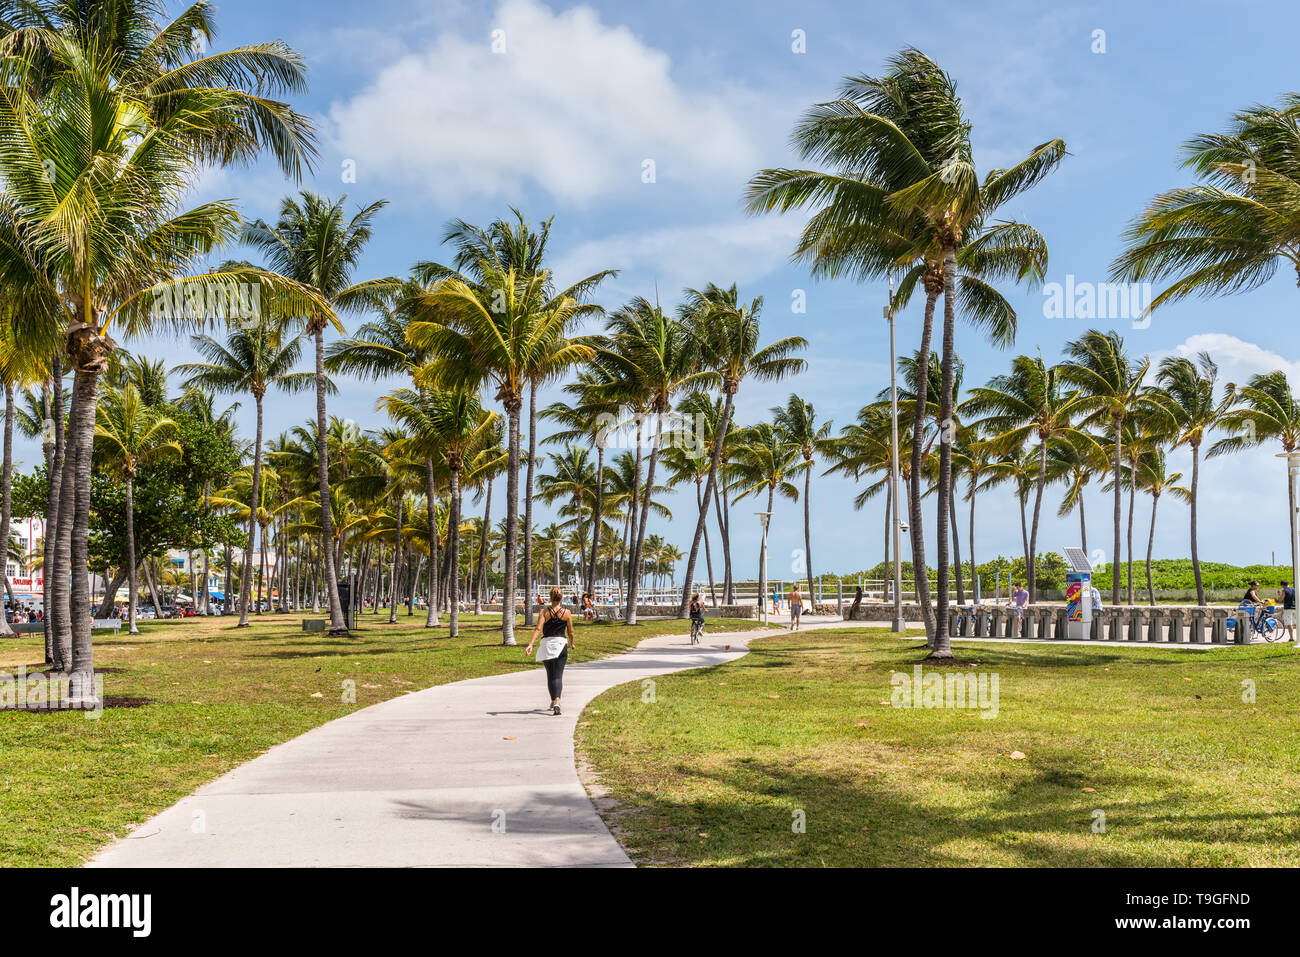 Miami, FL, USA - April 19, 2019: Lummus Park at the historical Art Deco District of Miami South Beach with hotels, cafe and restaurants on Ocean Drive Stock Photo